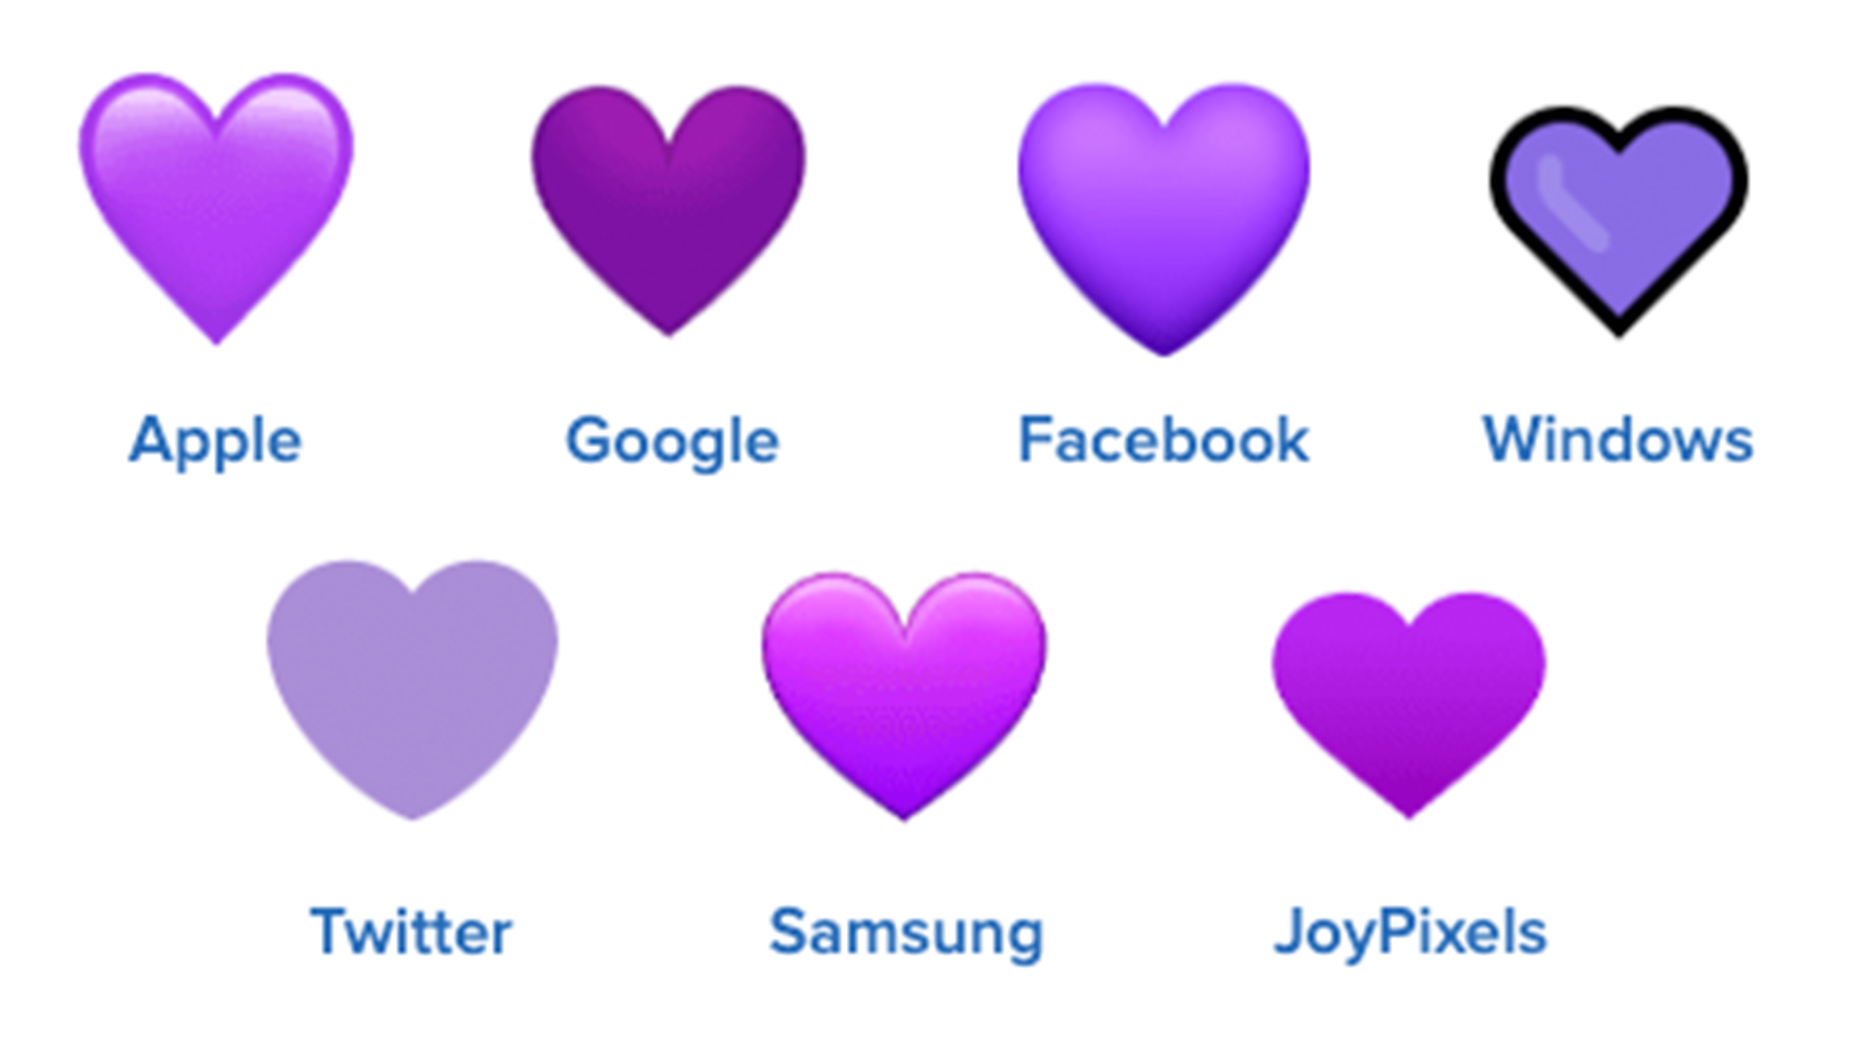 purple heart meaning emoticon